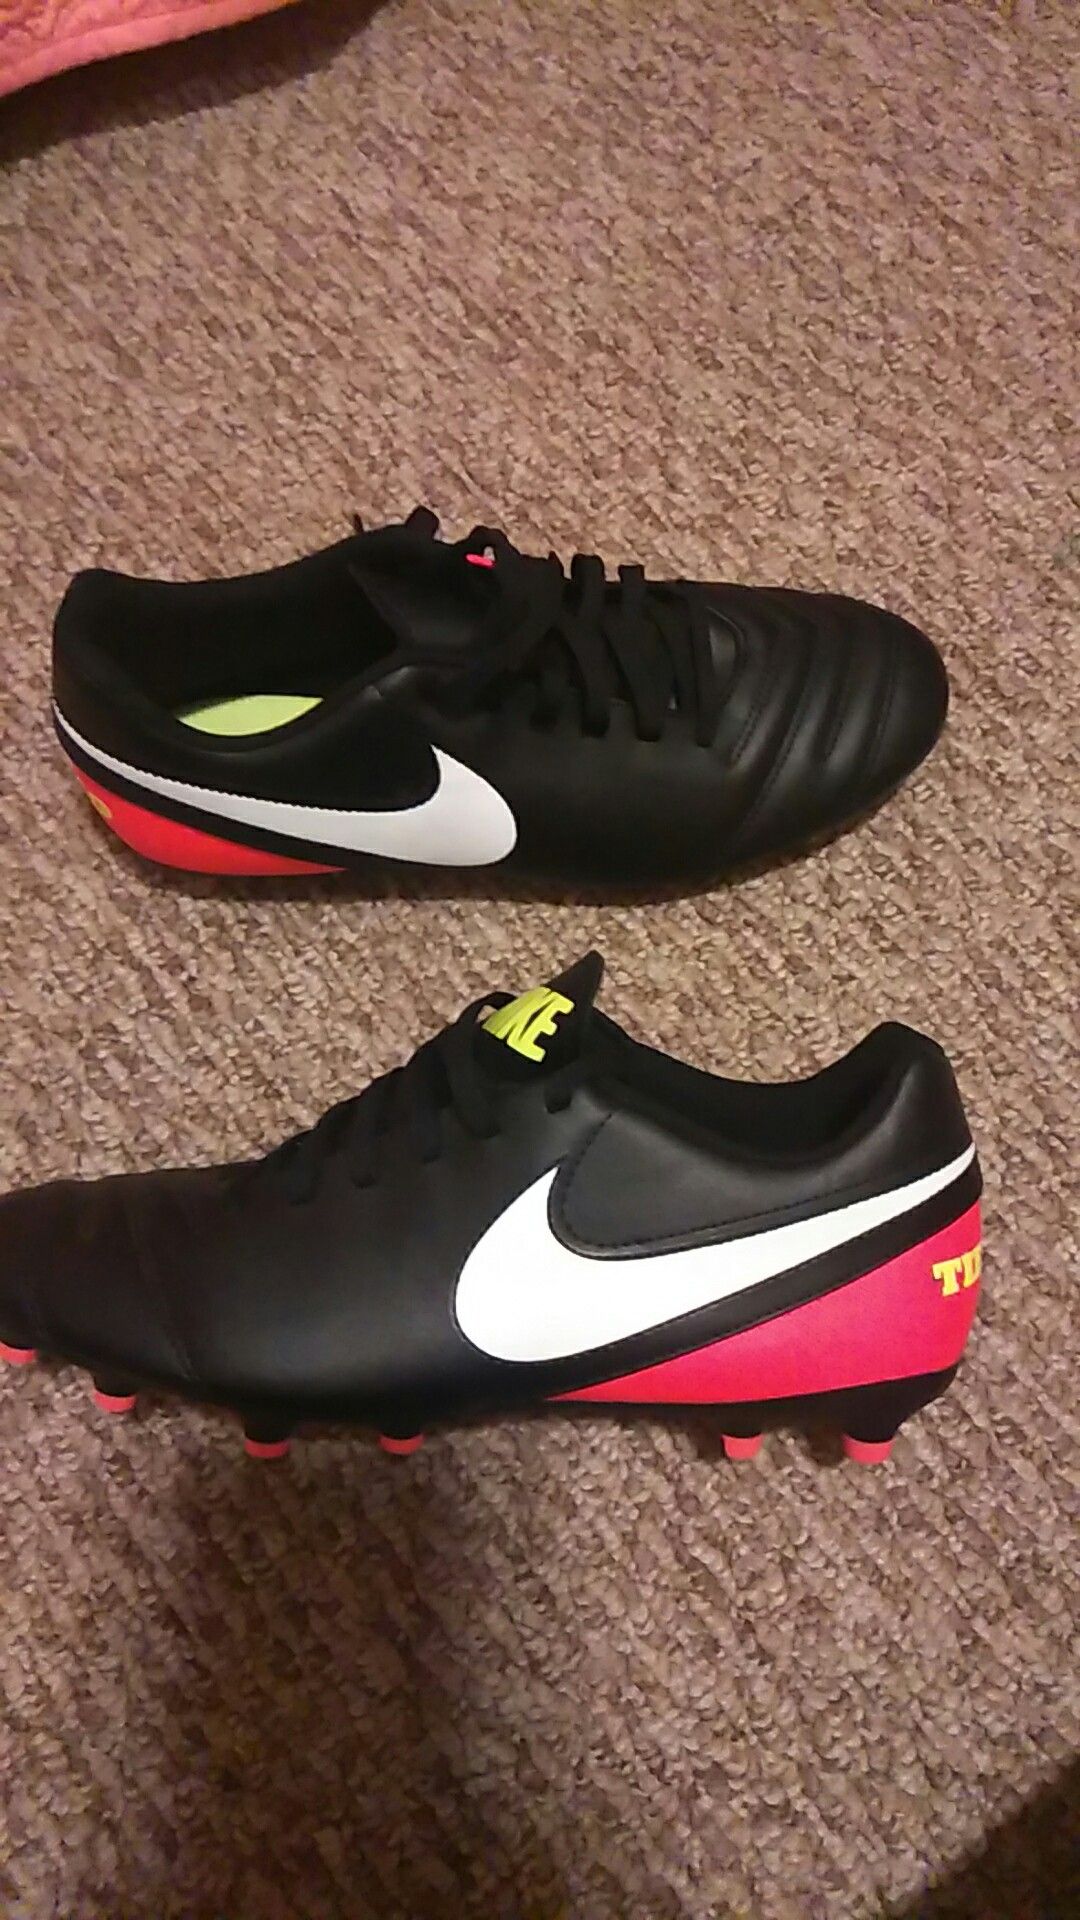 Nike cleats size 9